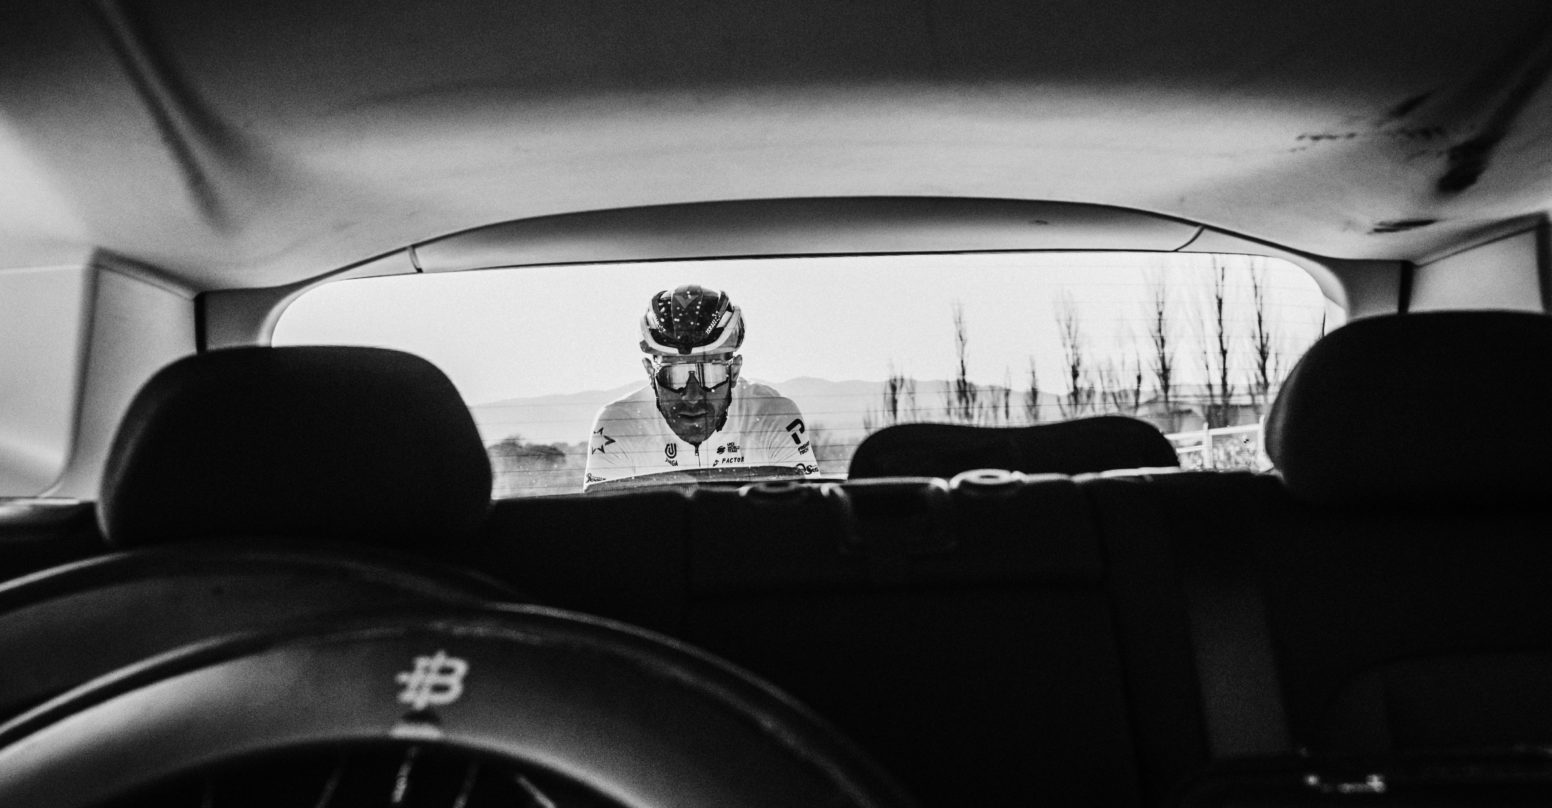 Rider seen through the back window of the team car